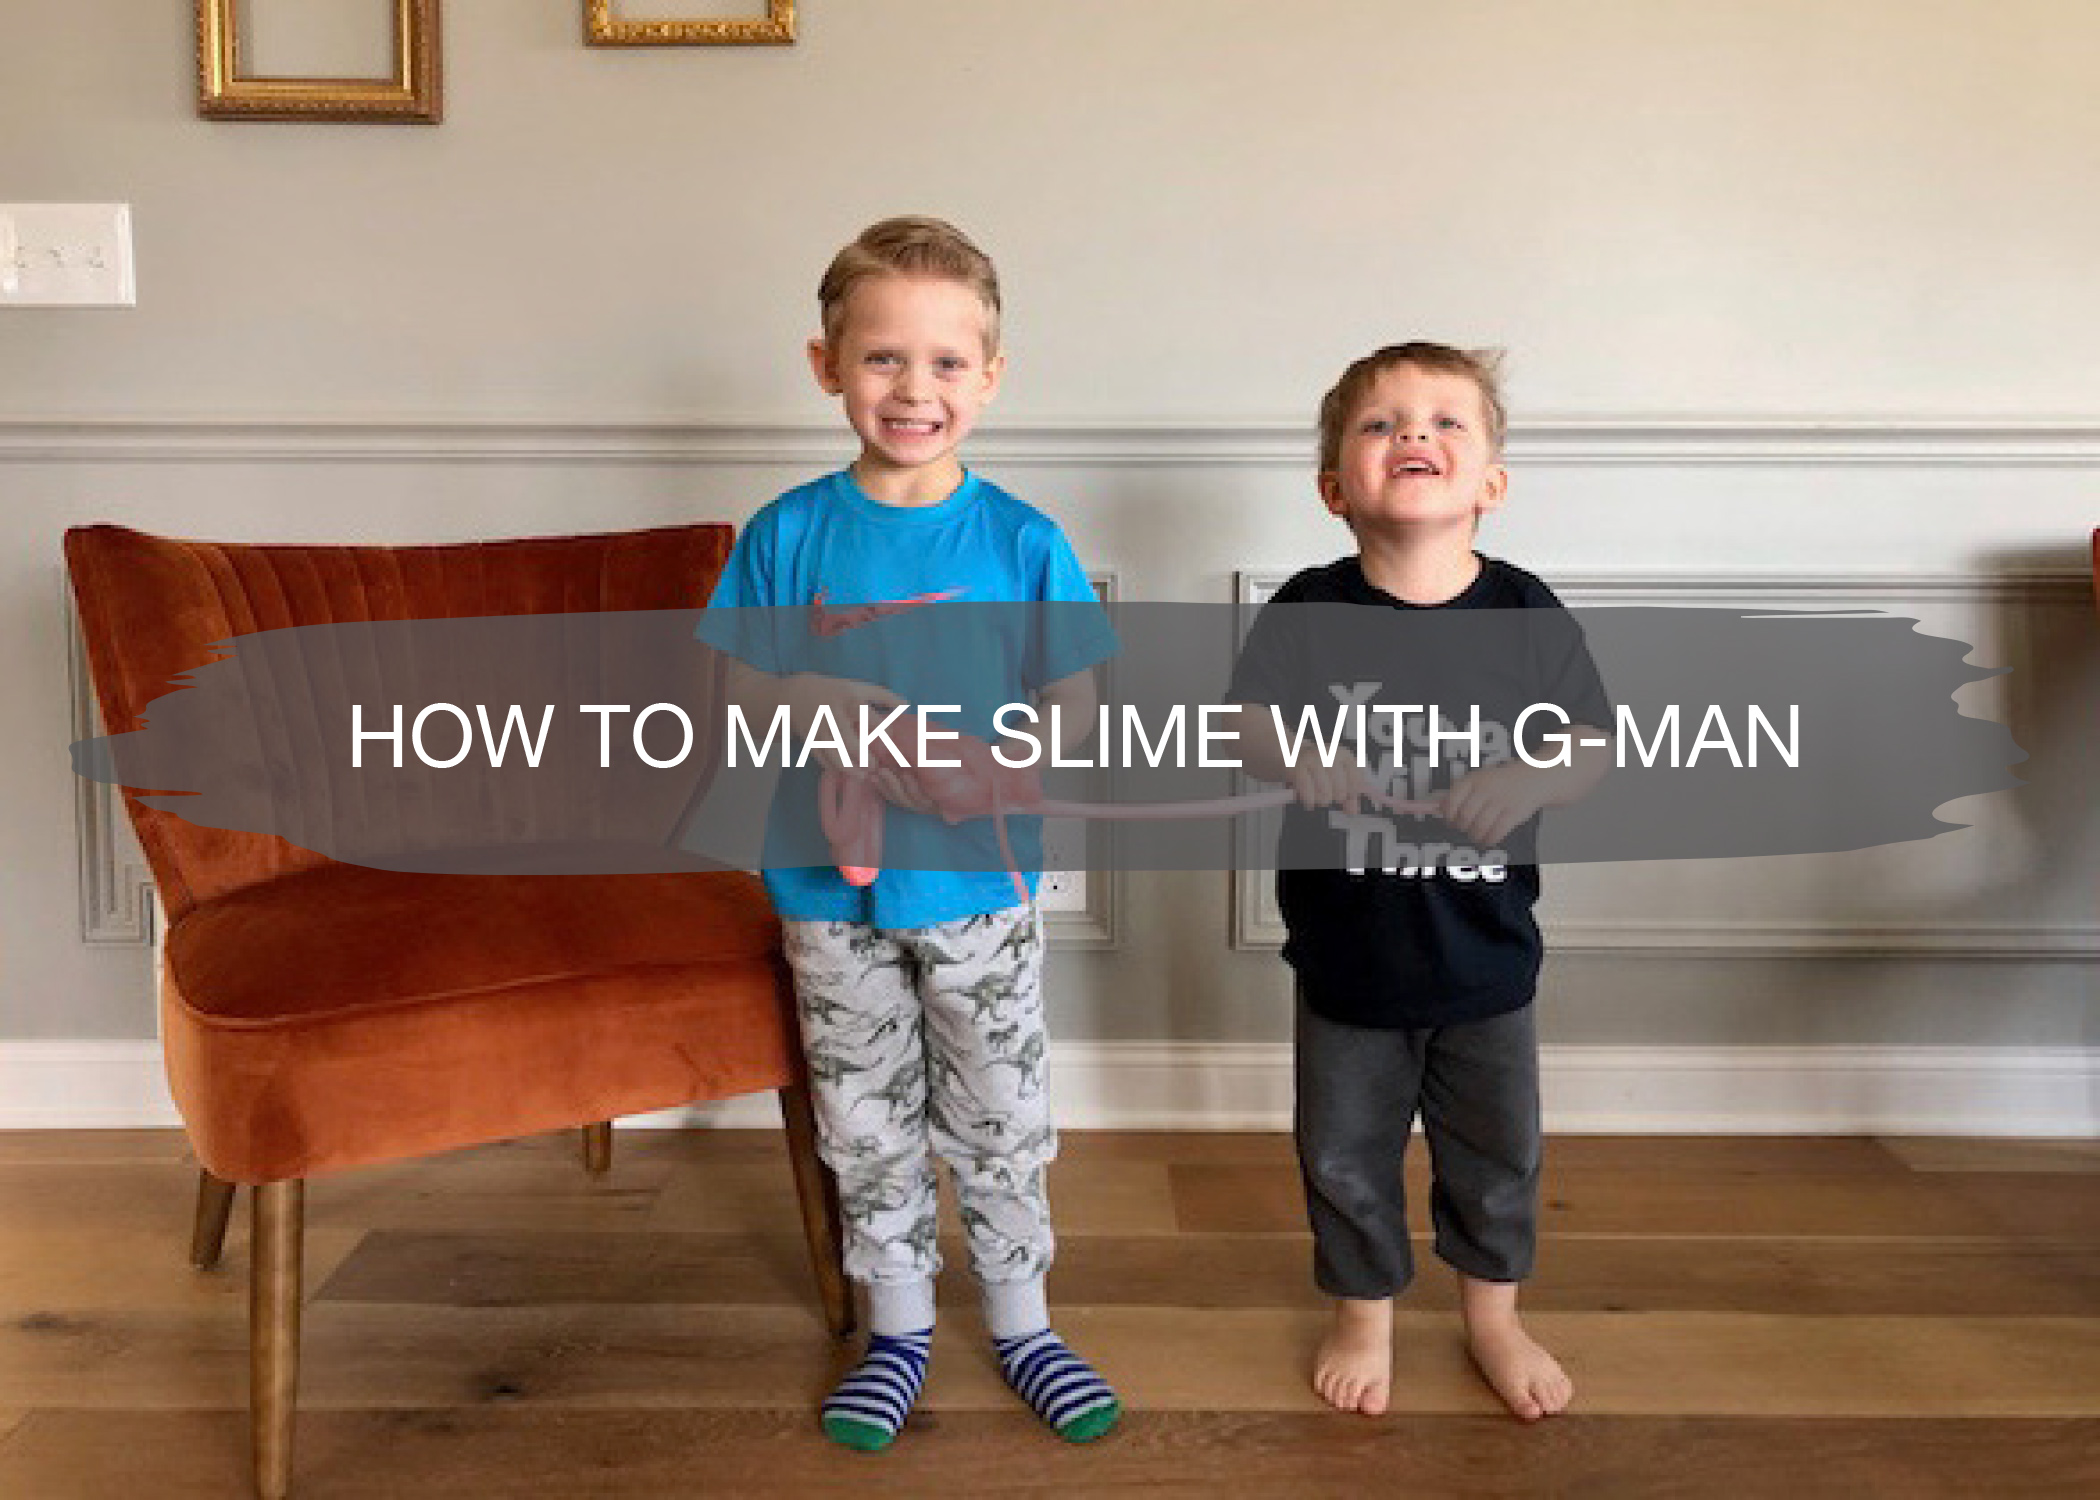 Making Slime with G-Man